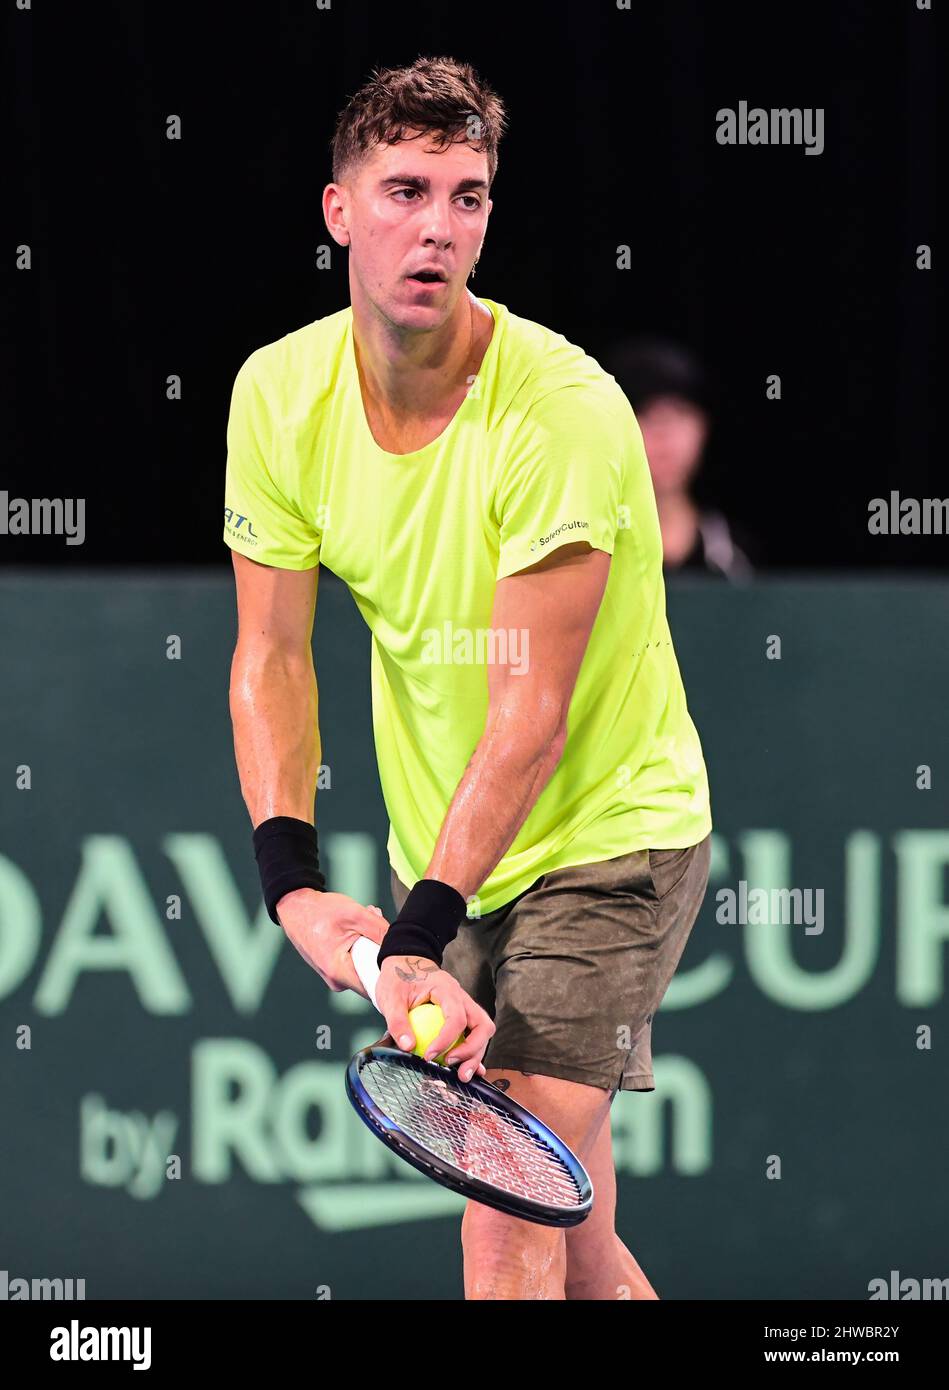 Thanasi Kokkinakis of Australia in action during the 2022 Davis Cup Qualifying Round match against Zsombor Piros of Hungary at Ken Rosewell Stadium